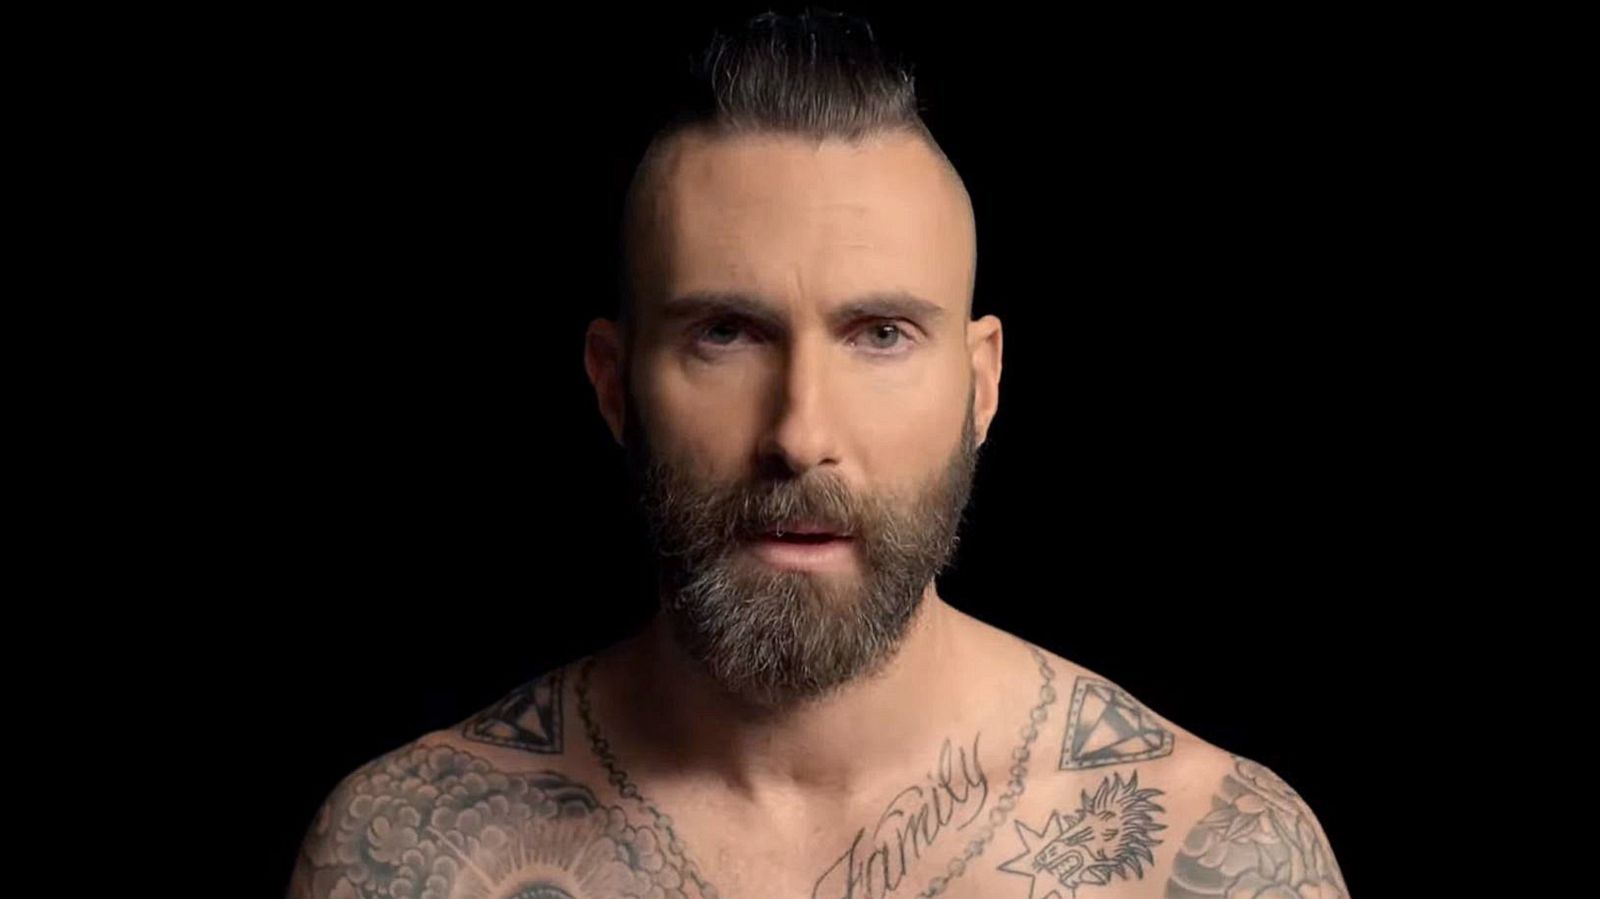 Maroon 5's video for 'Memories' addresses grief and loss